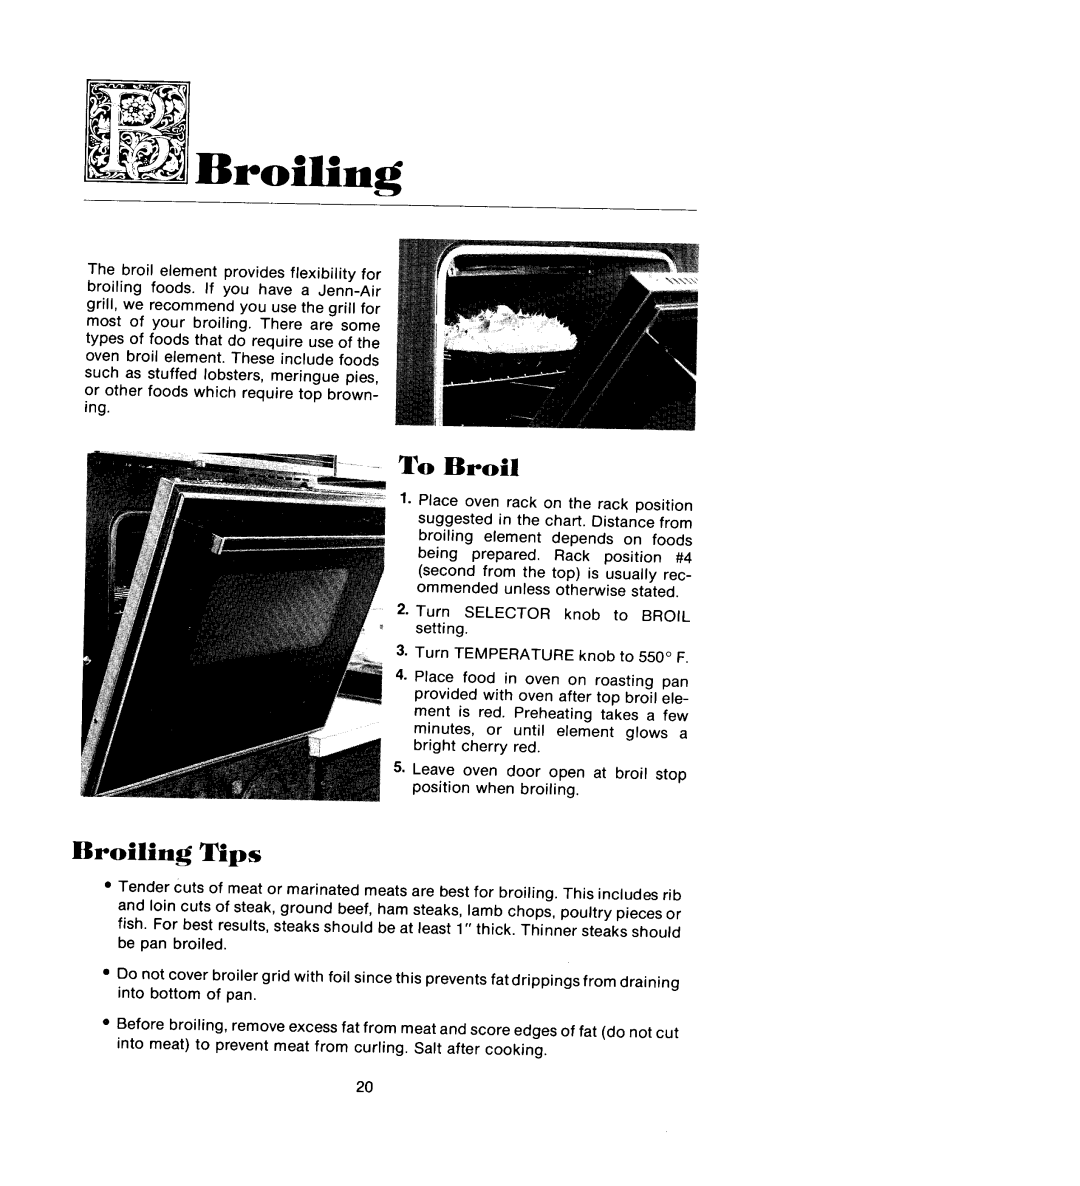 Jenn-Air W225, W122 manual To Broil, Broiling Tips 